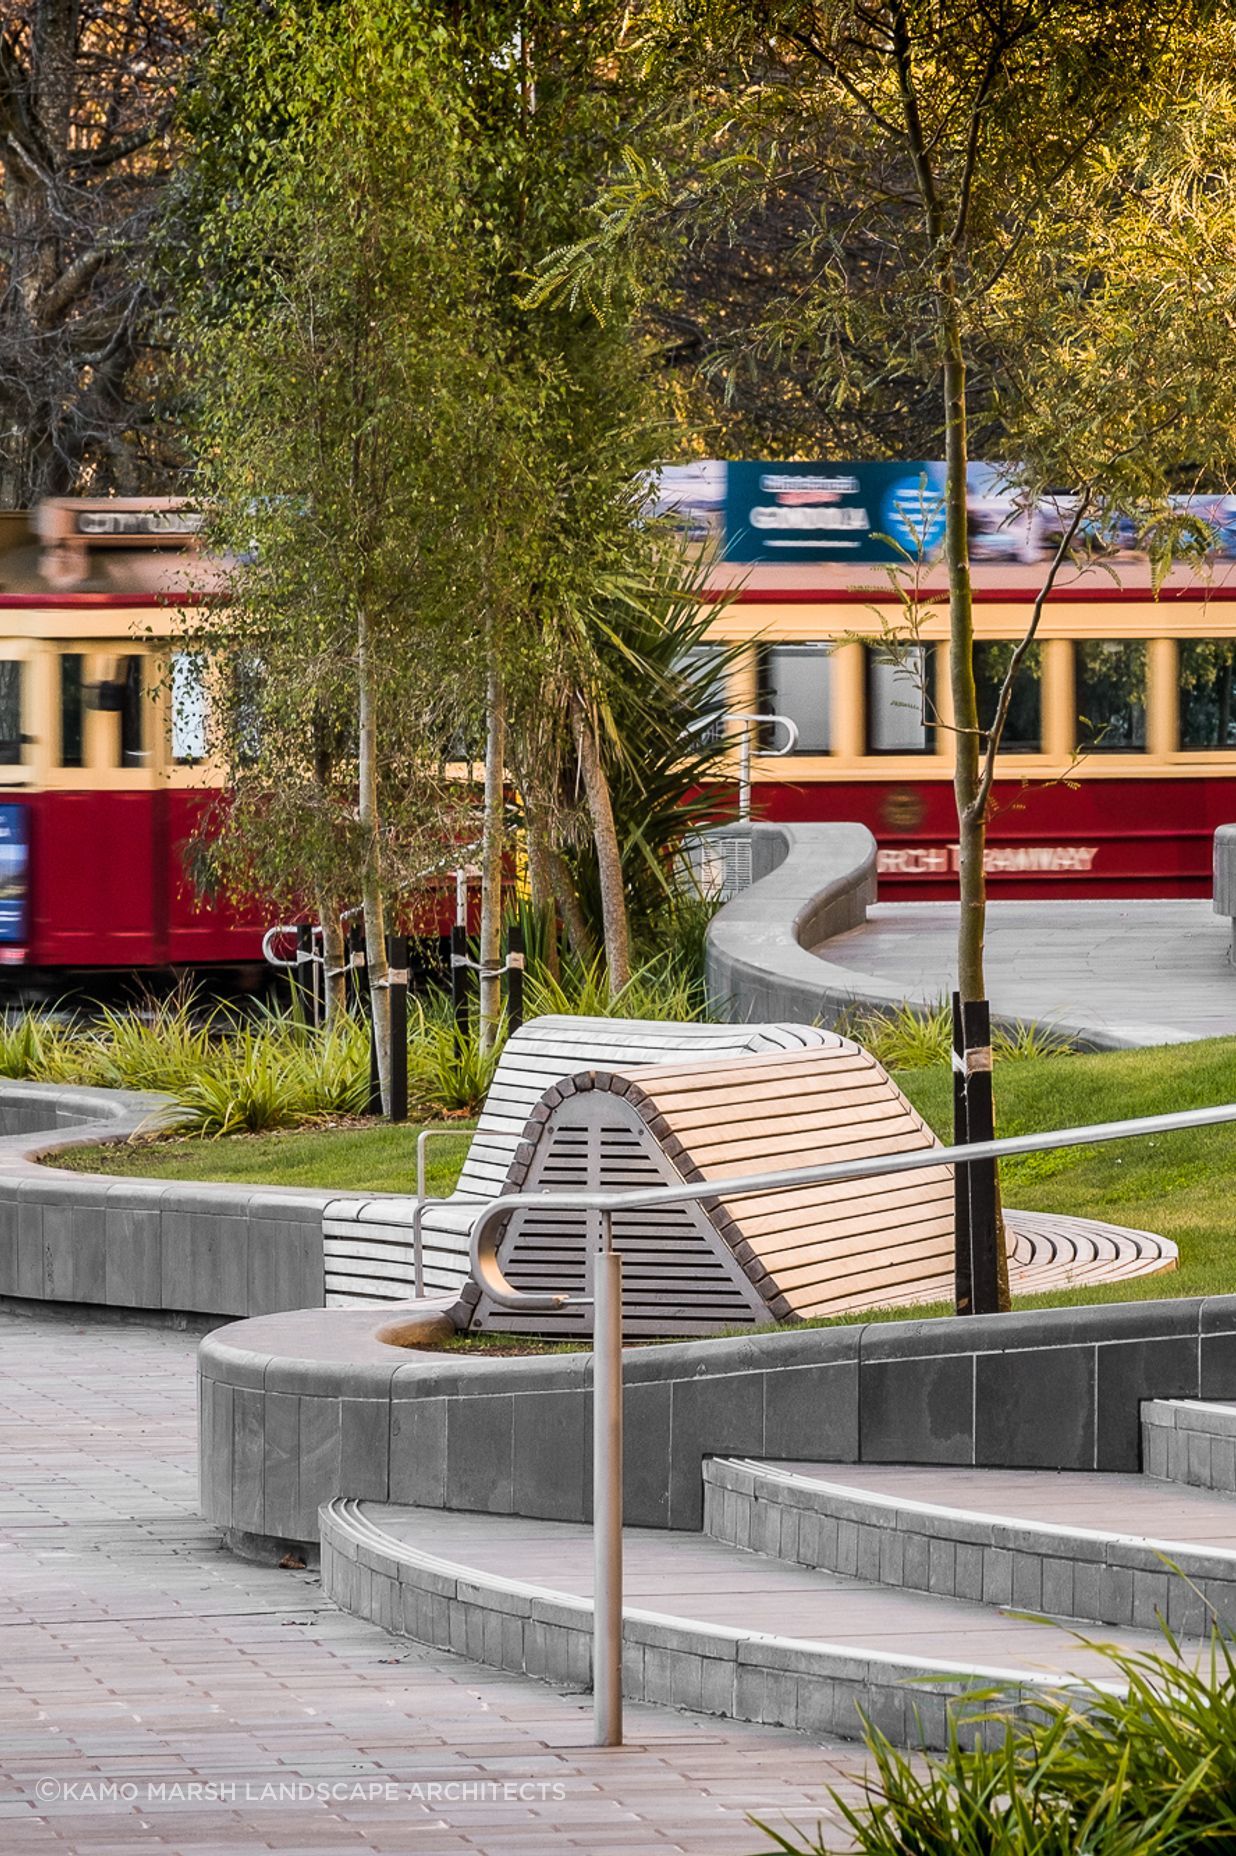 The landscape's curved walls and benches nod to the fluidity of the Avon River.